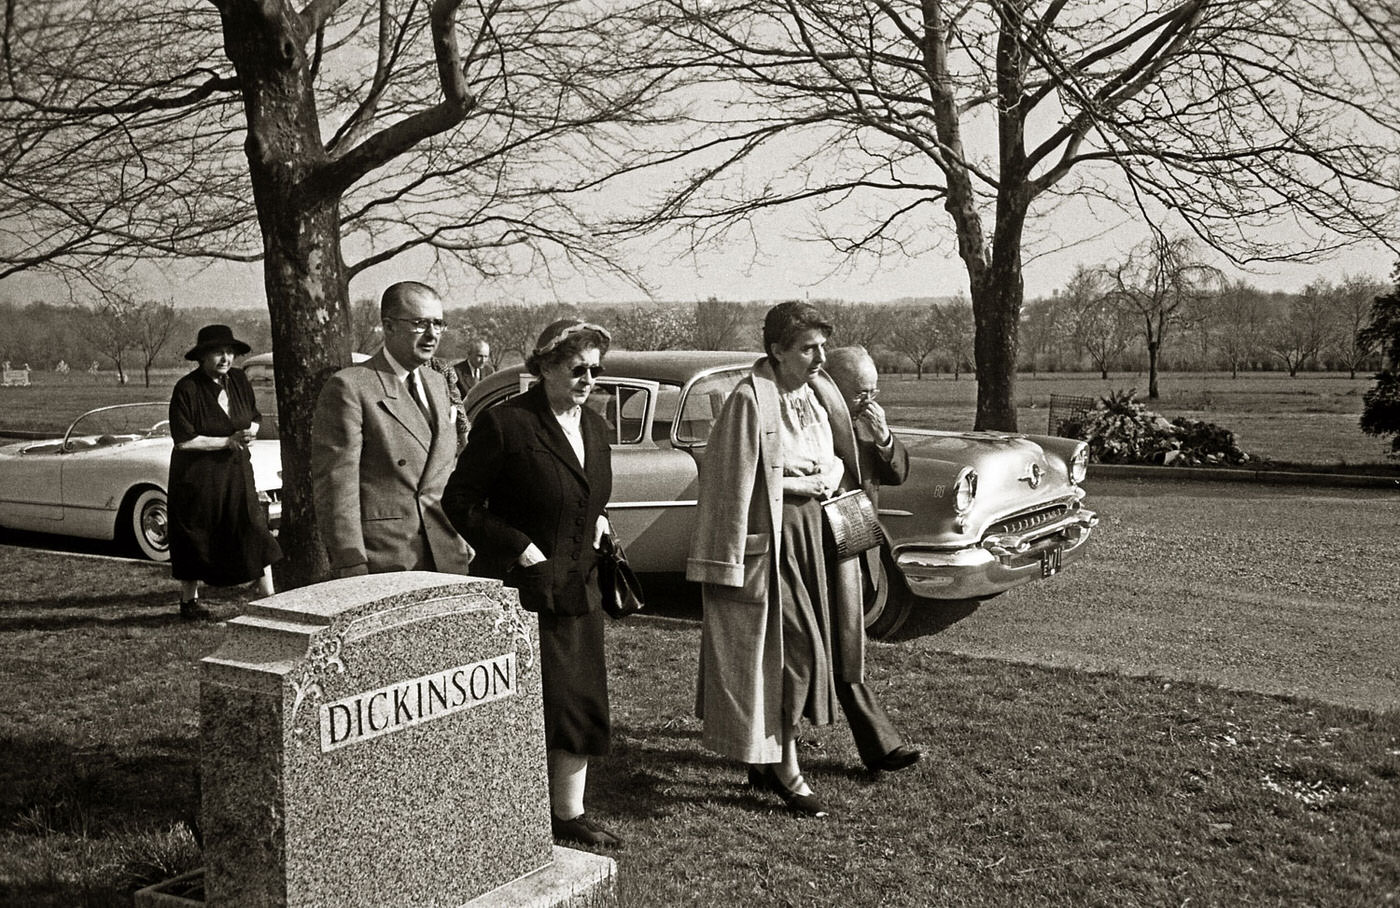 On April 18, 1955, family and friends of Albert Einstein, including his son Hans Albert, his longtime secretary Helen Dukas, and his friend Dr. Gustav Bucky, gather at the Ewing Crematorium in Trenton, New Jersey, for his funeral service. An unidentified woman also joins them.